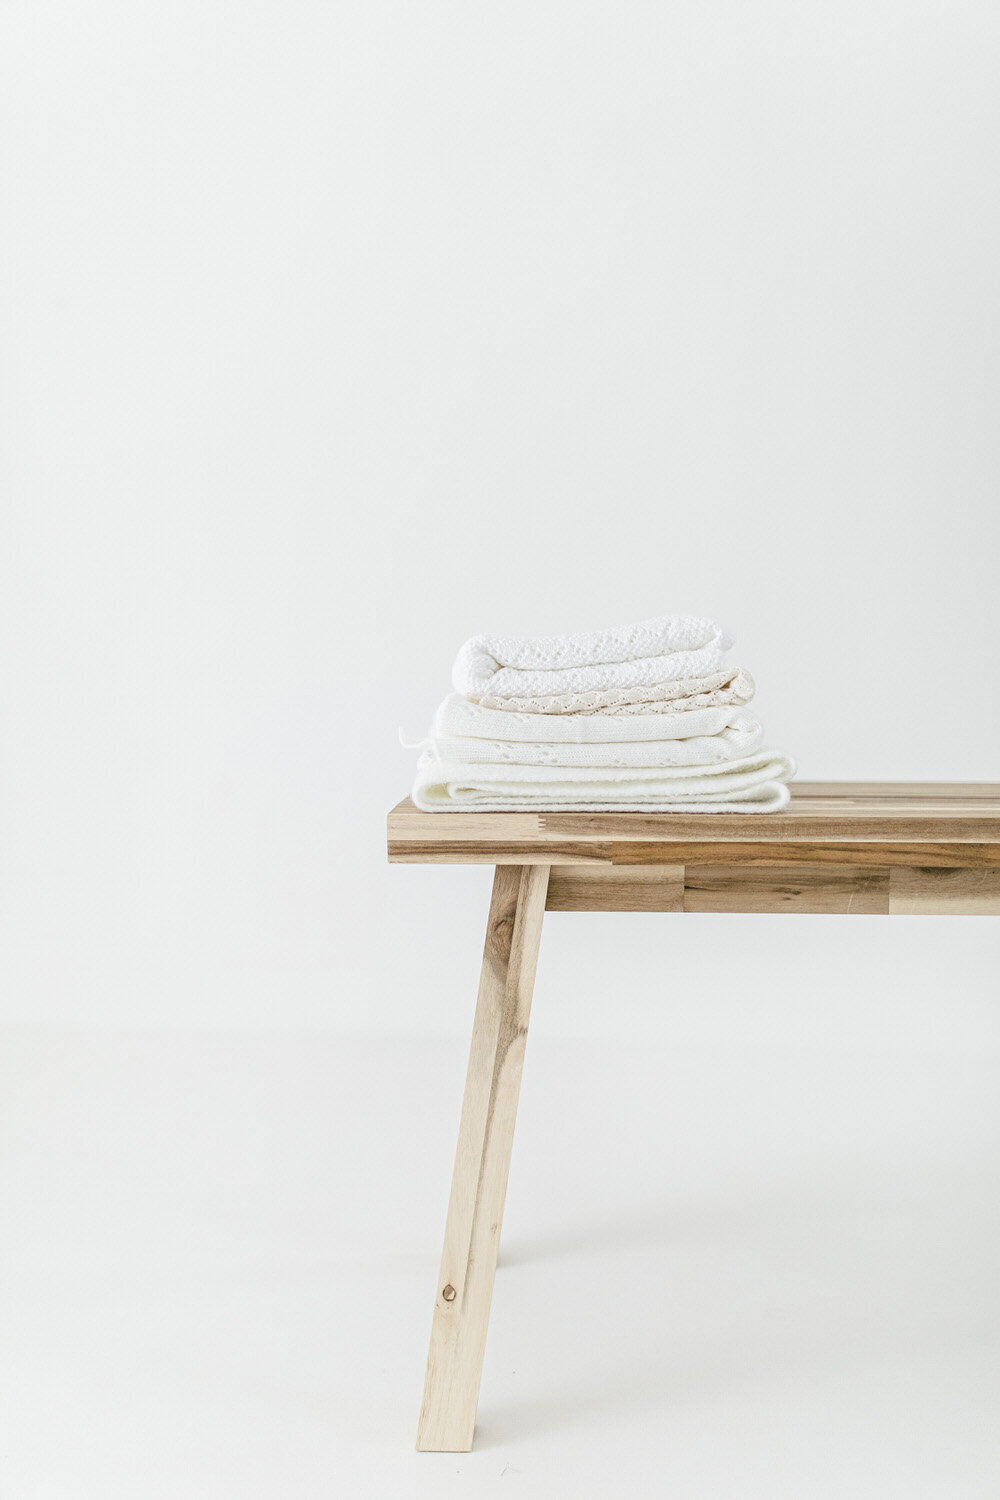 Wooden bench with blankets stacked ontop